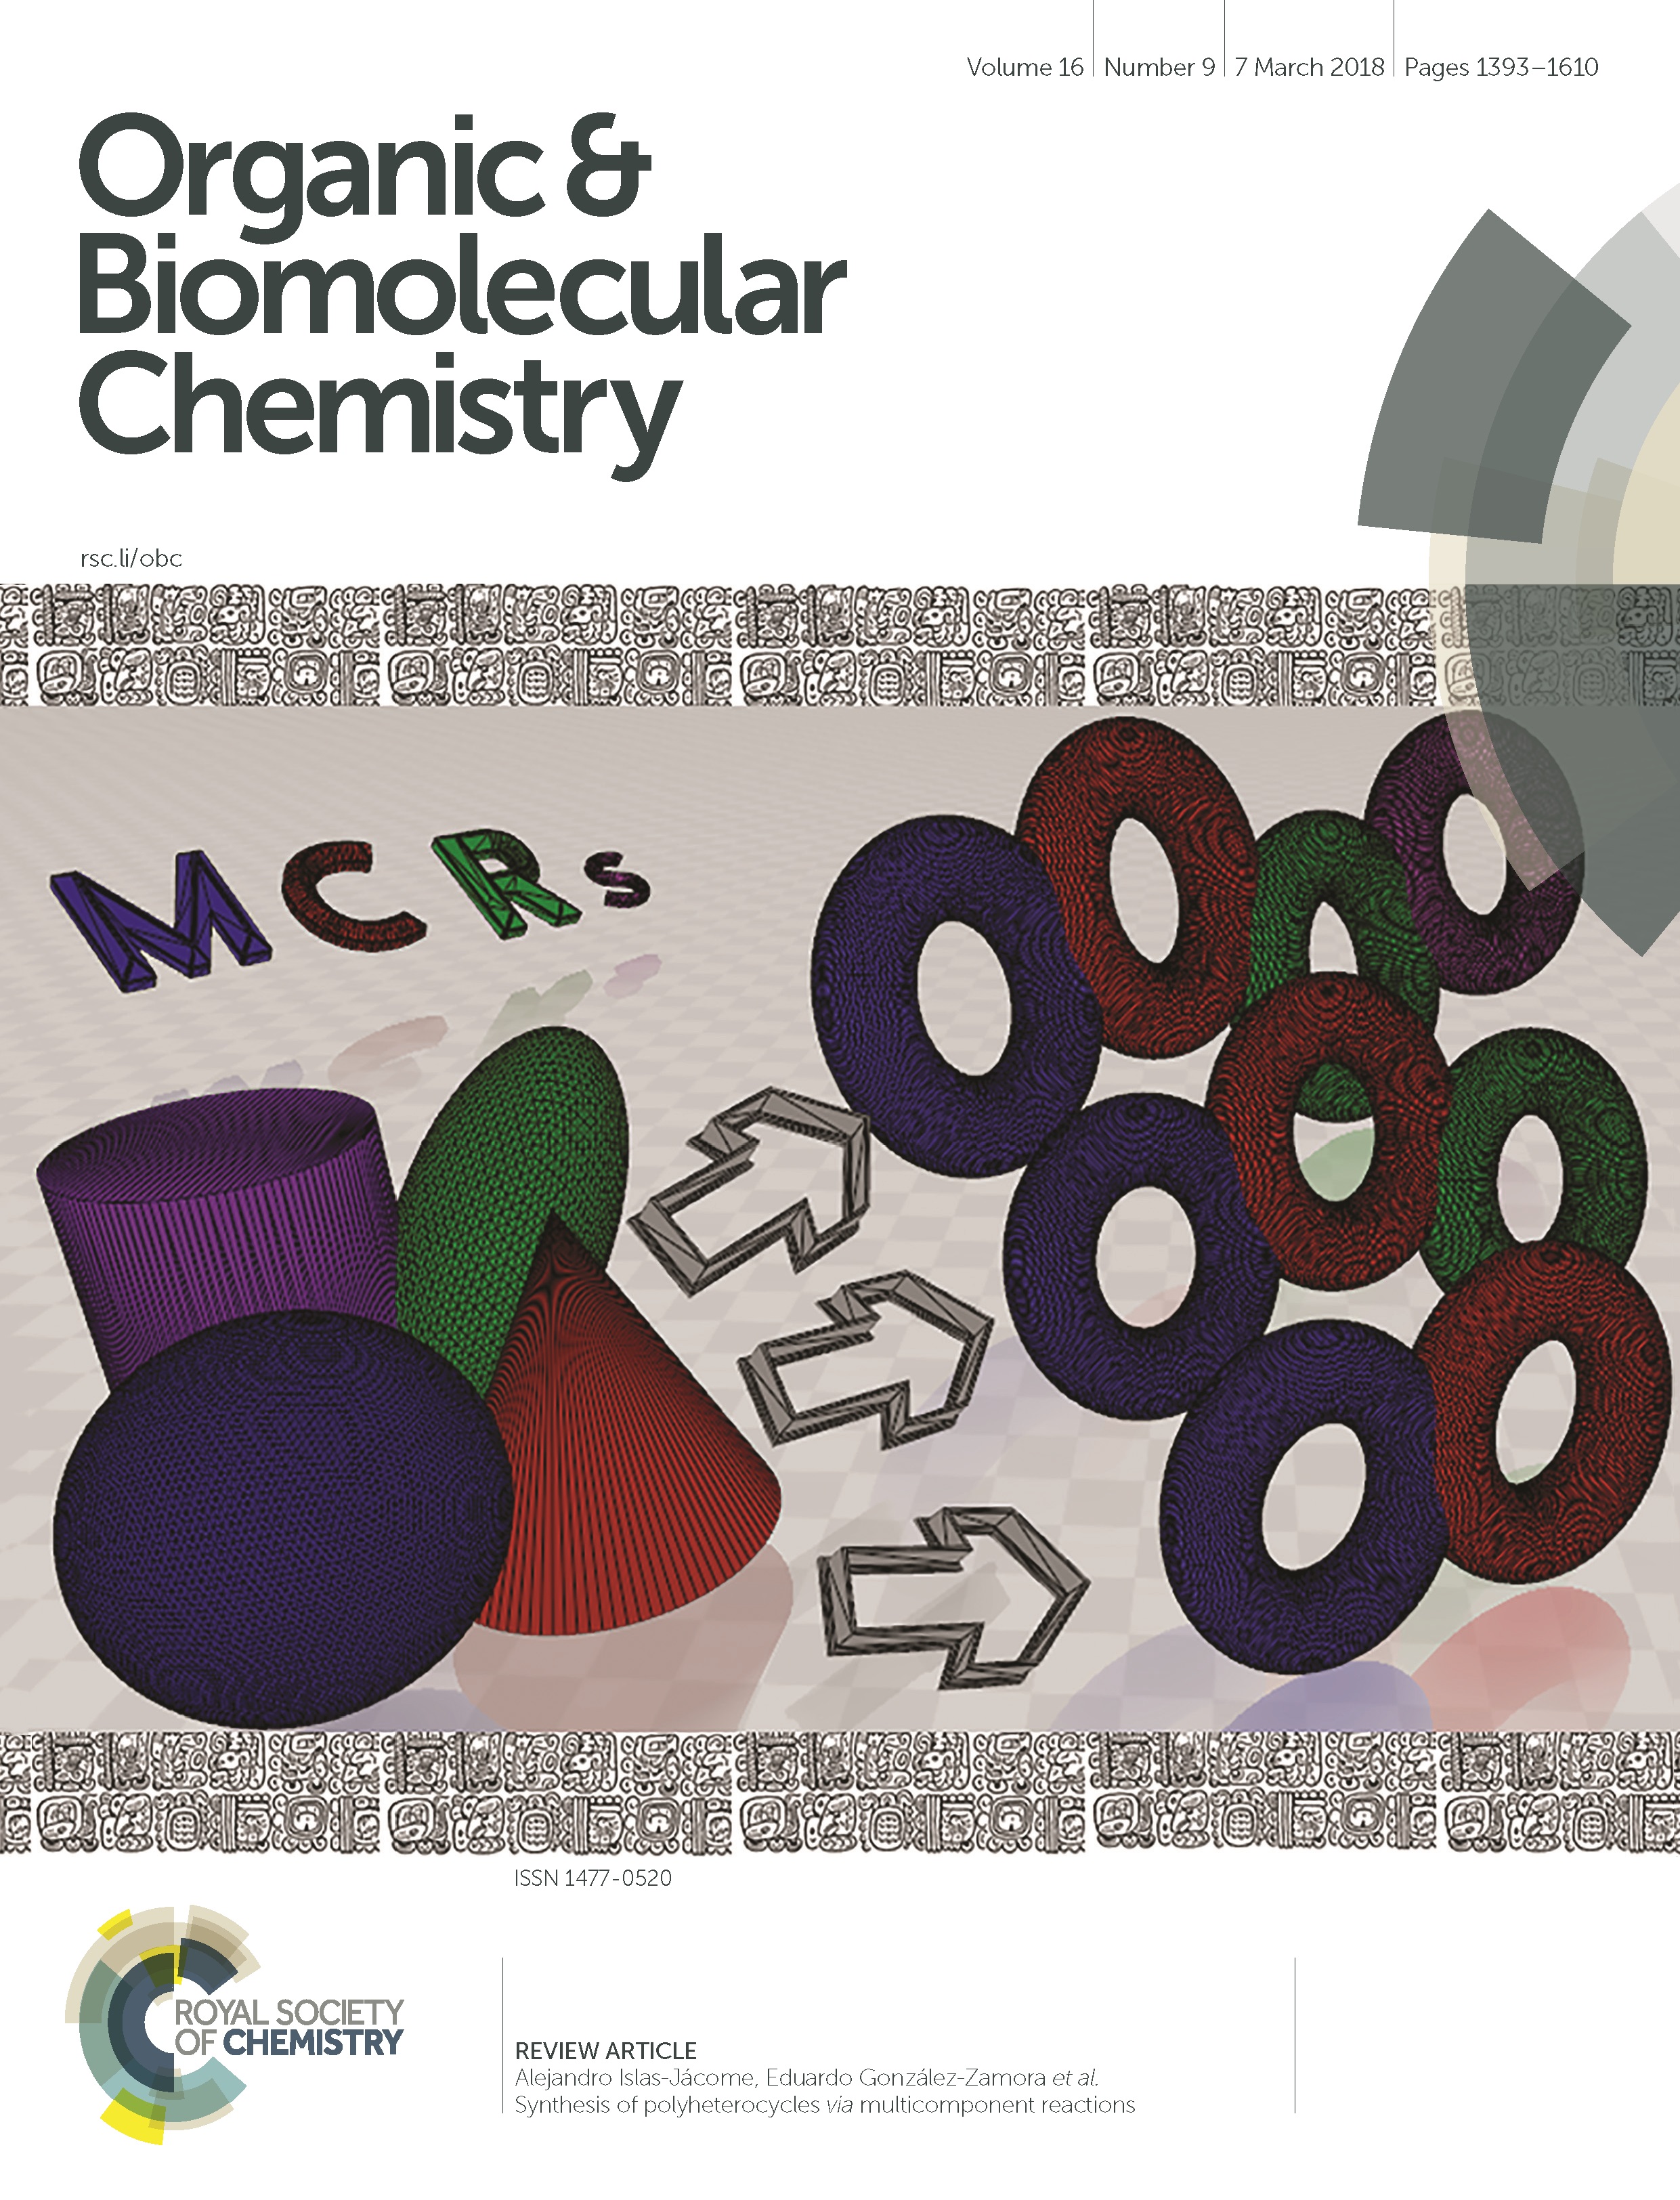 Organic & Biomolecular Chemistry _Front Cover of the Magazine: